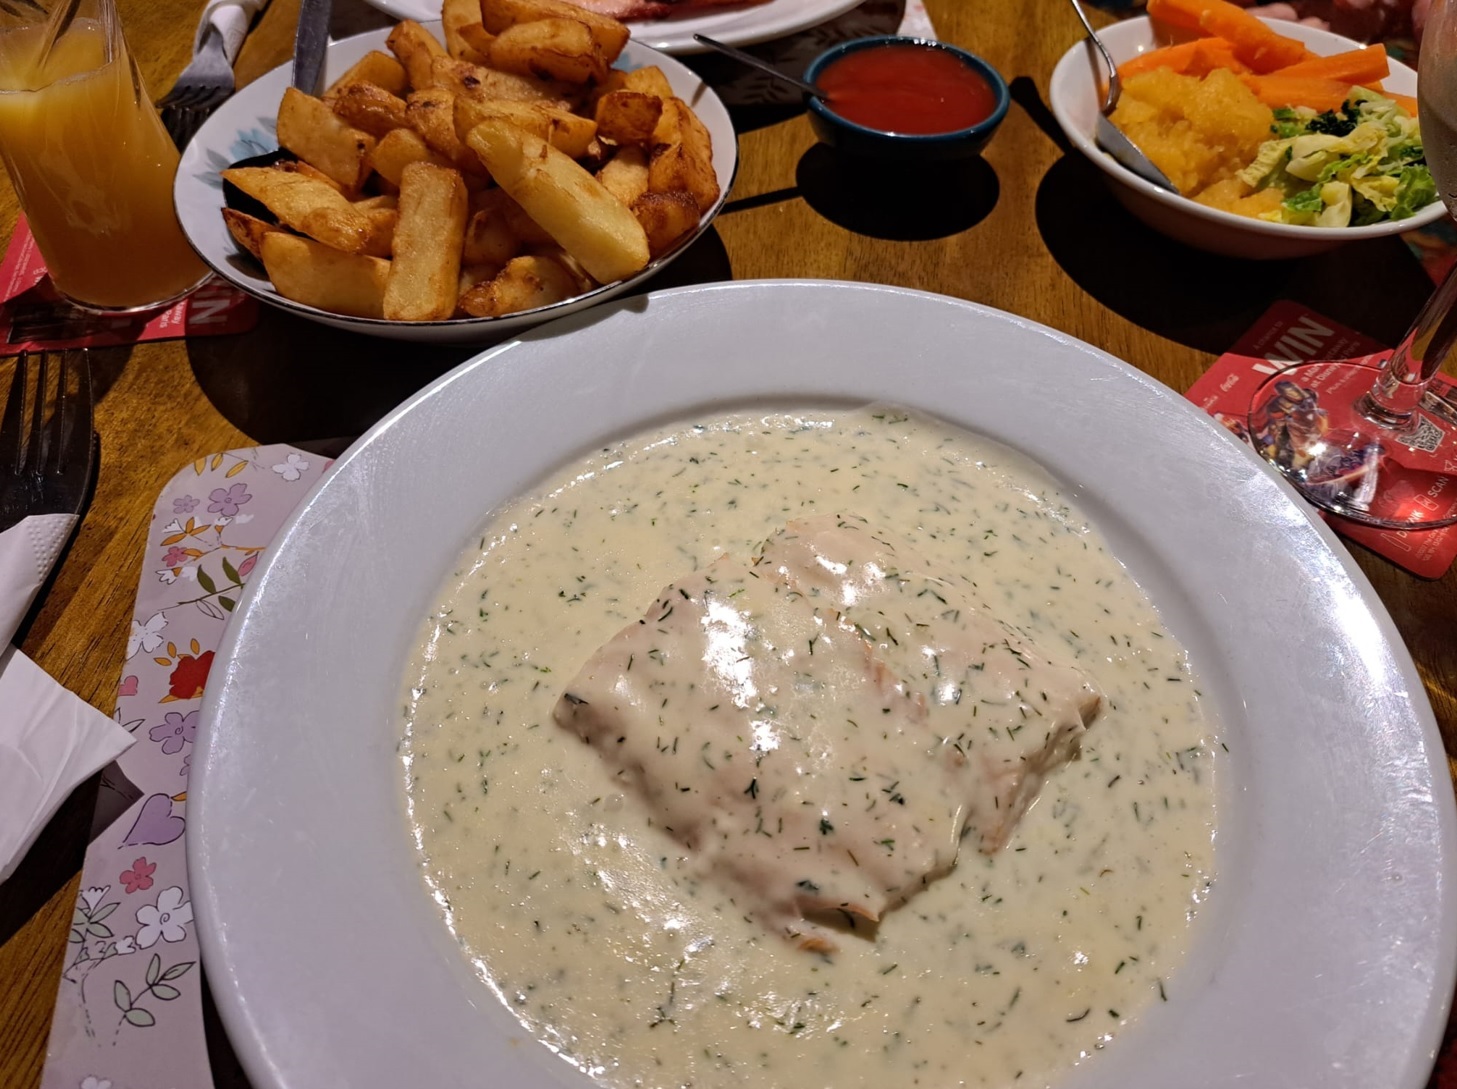 Salmon in dill sauce from the signature menu